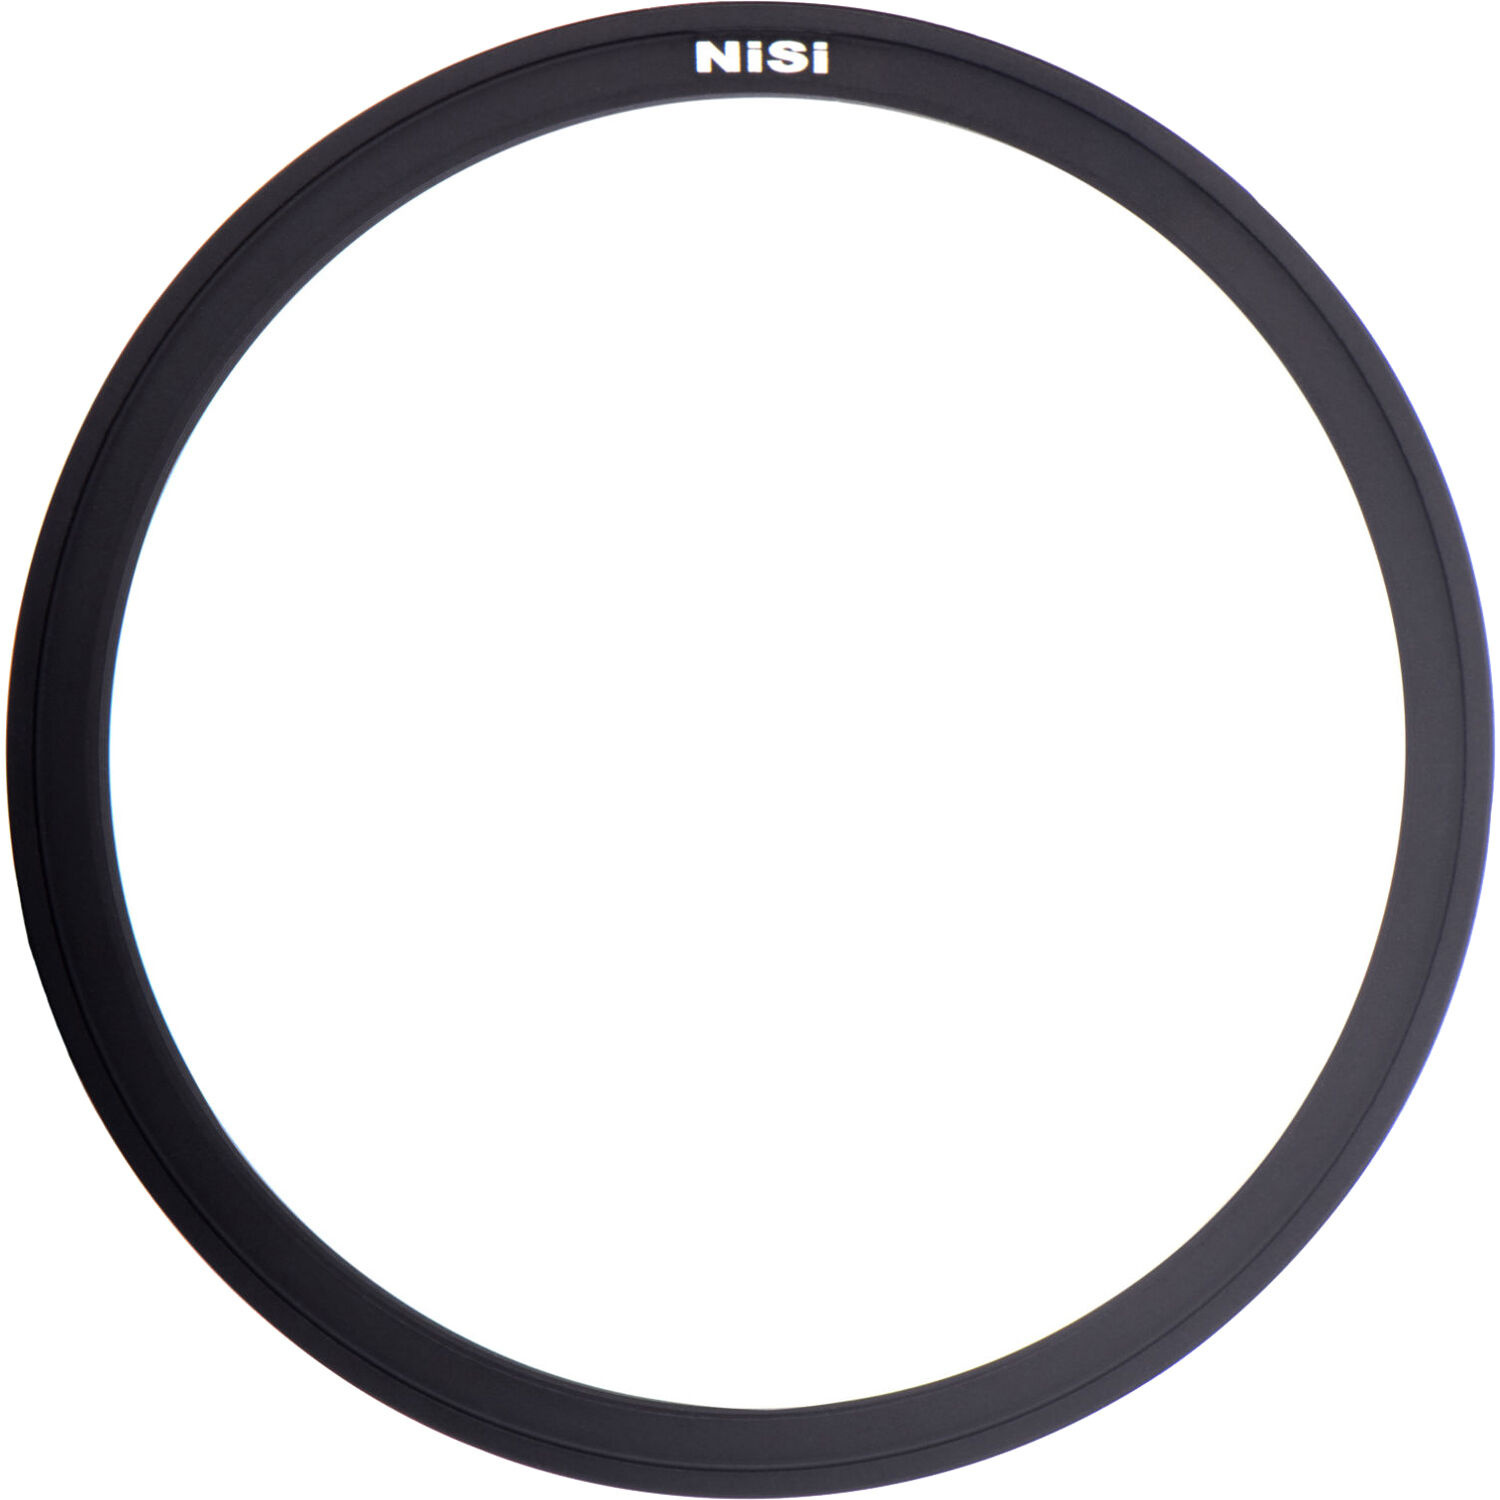 NiSi 82mm Adaptor for NiSi Close Up Lens Kit NC 77mm (Step Down 82-77mm)